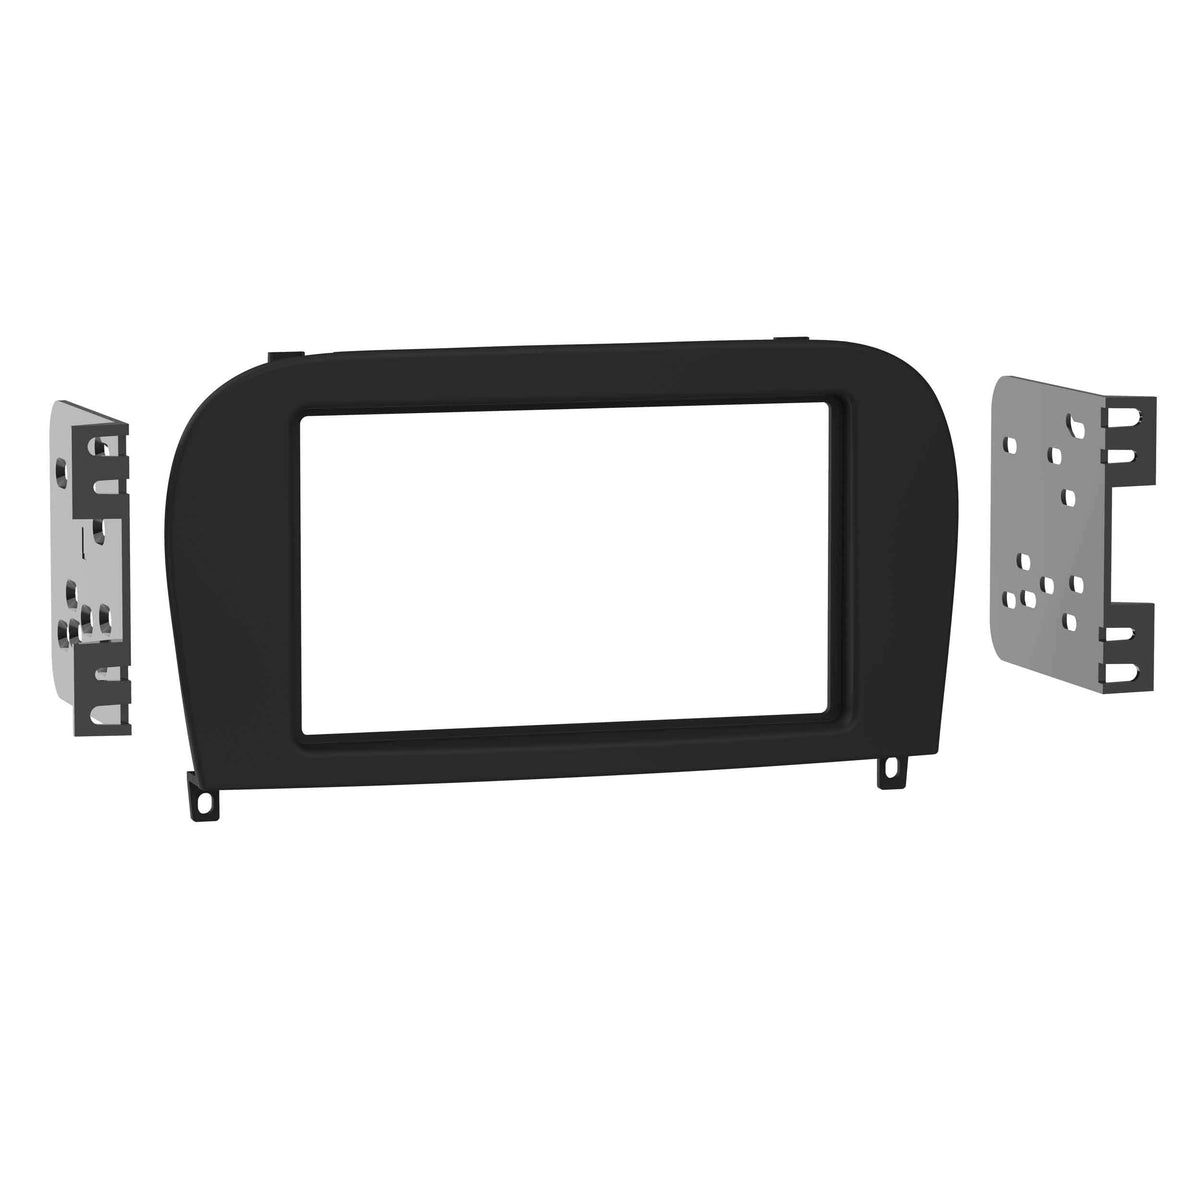 Metra 95-8735B Dash Kit Install a new Double-DIN car stereo in select 2003-2008 vehicles from Mercedes-Benz